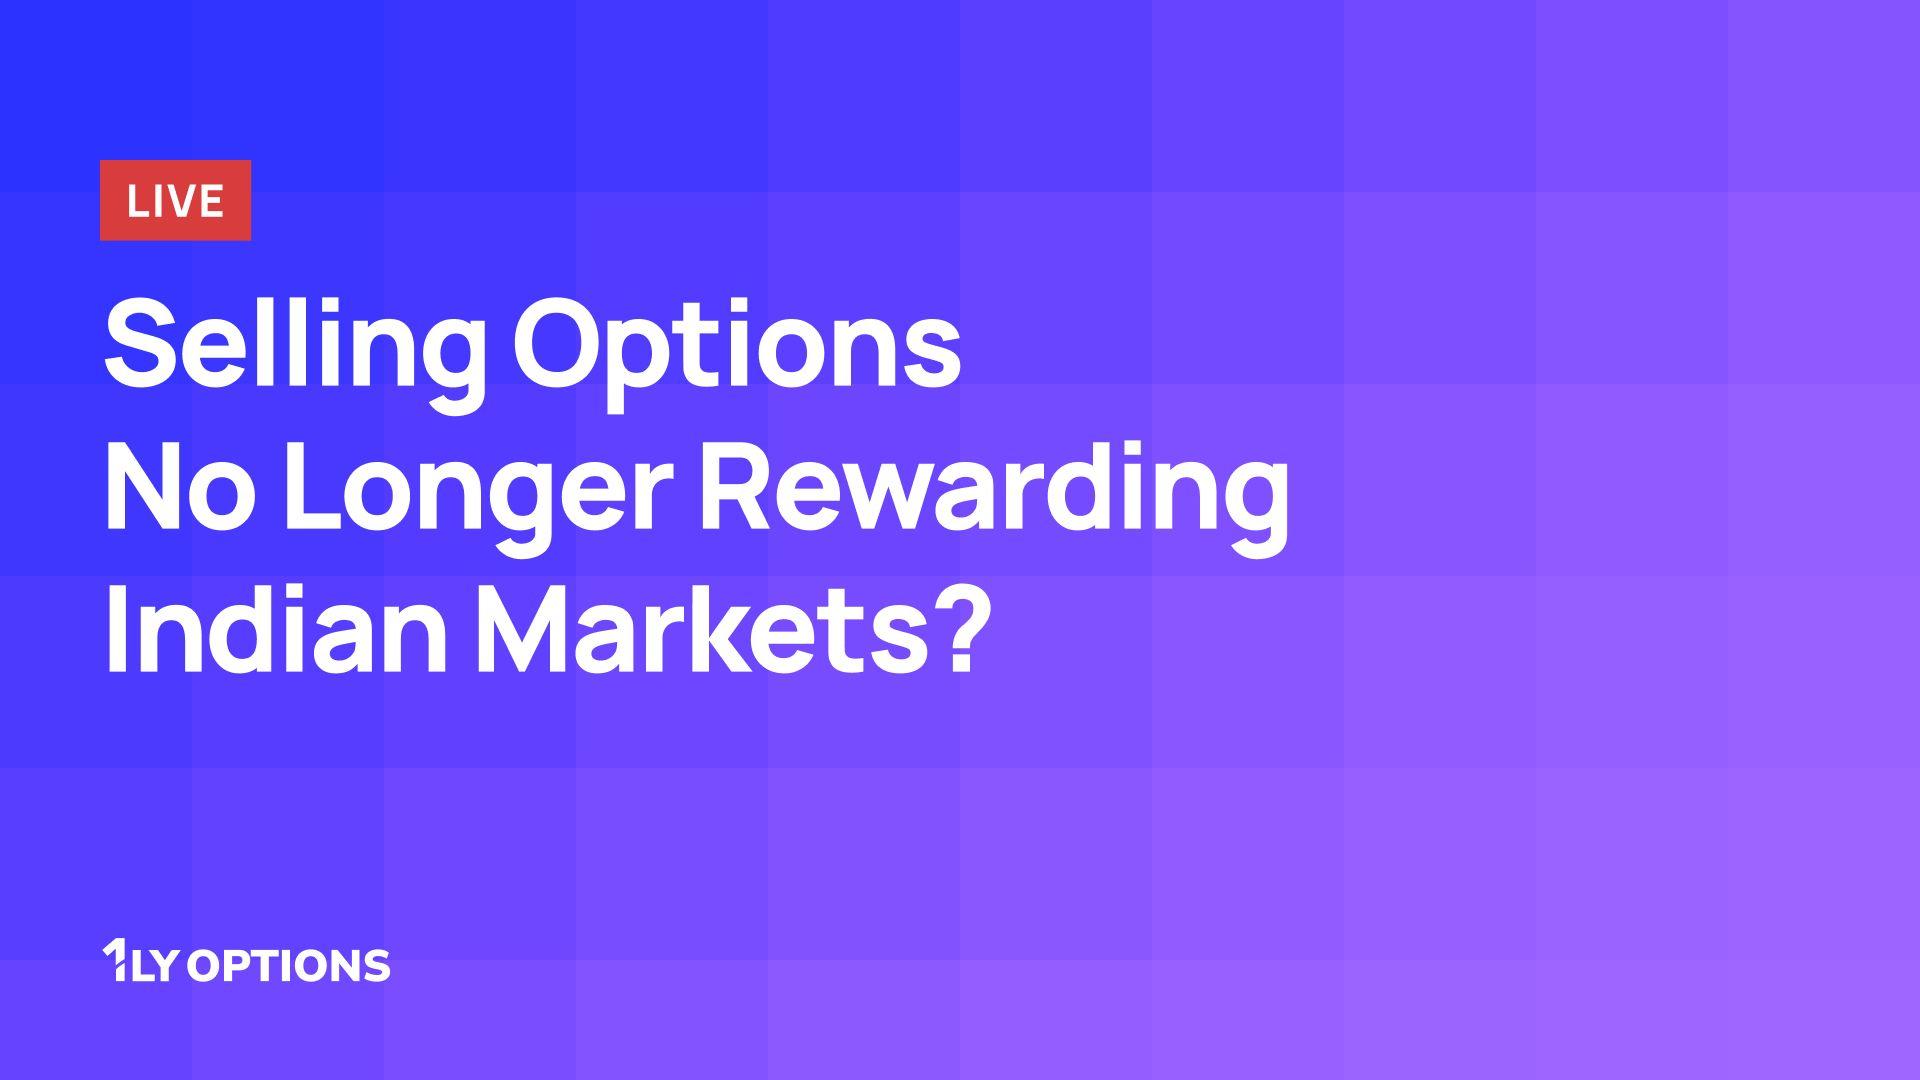 Selling Options No Longer Rewarding in the Indian Markets?